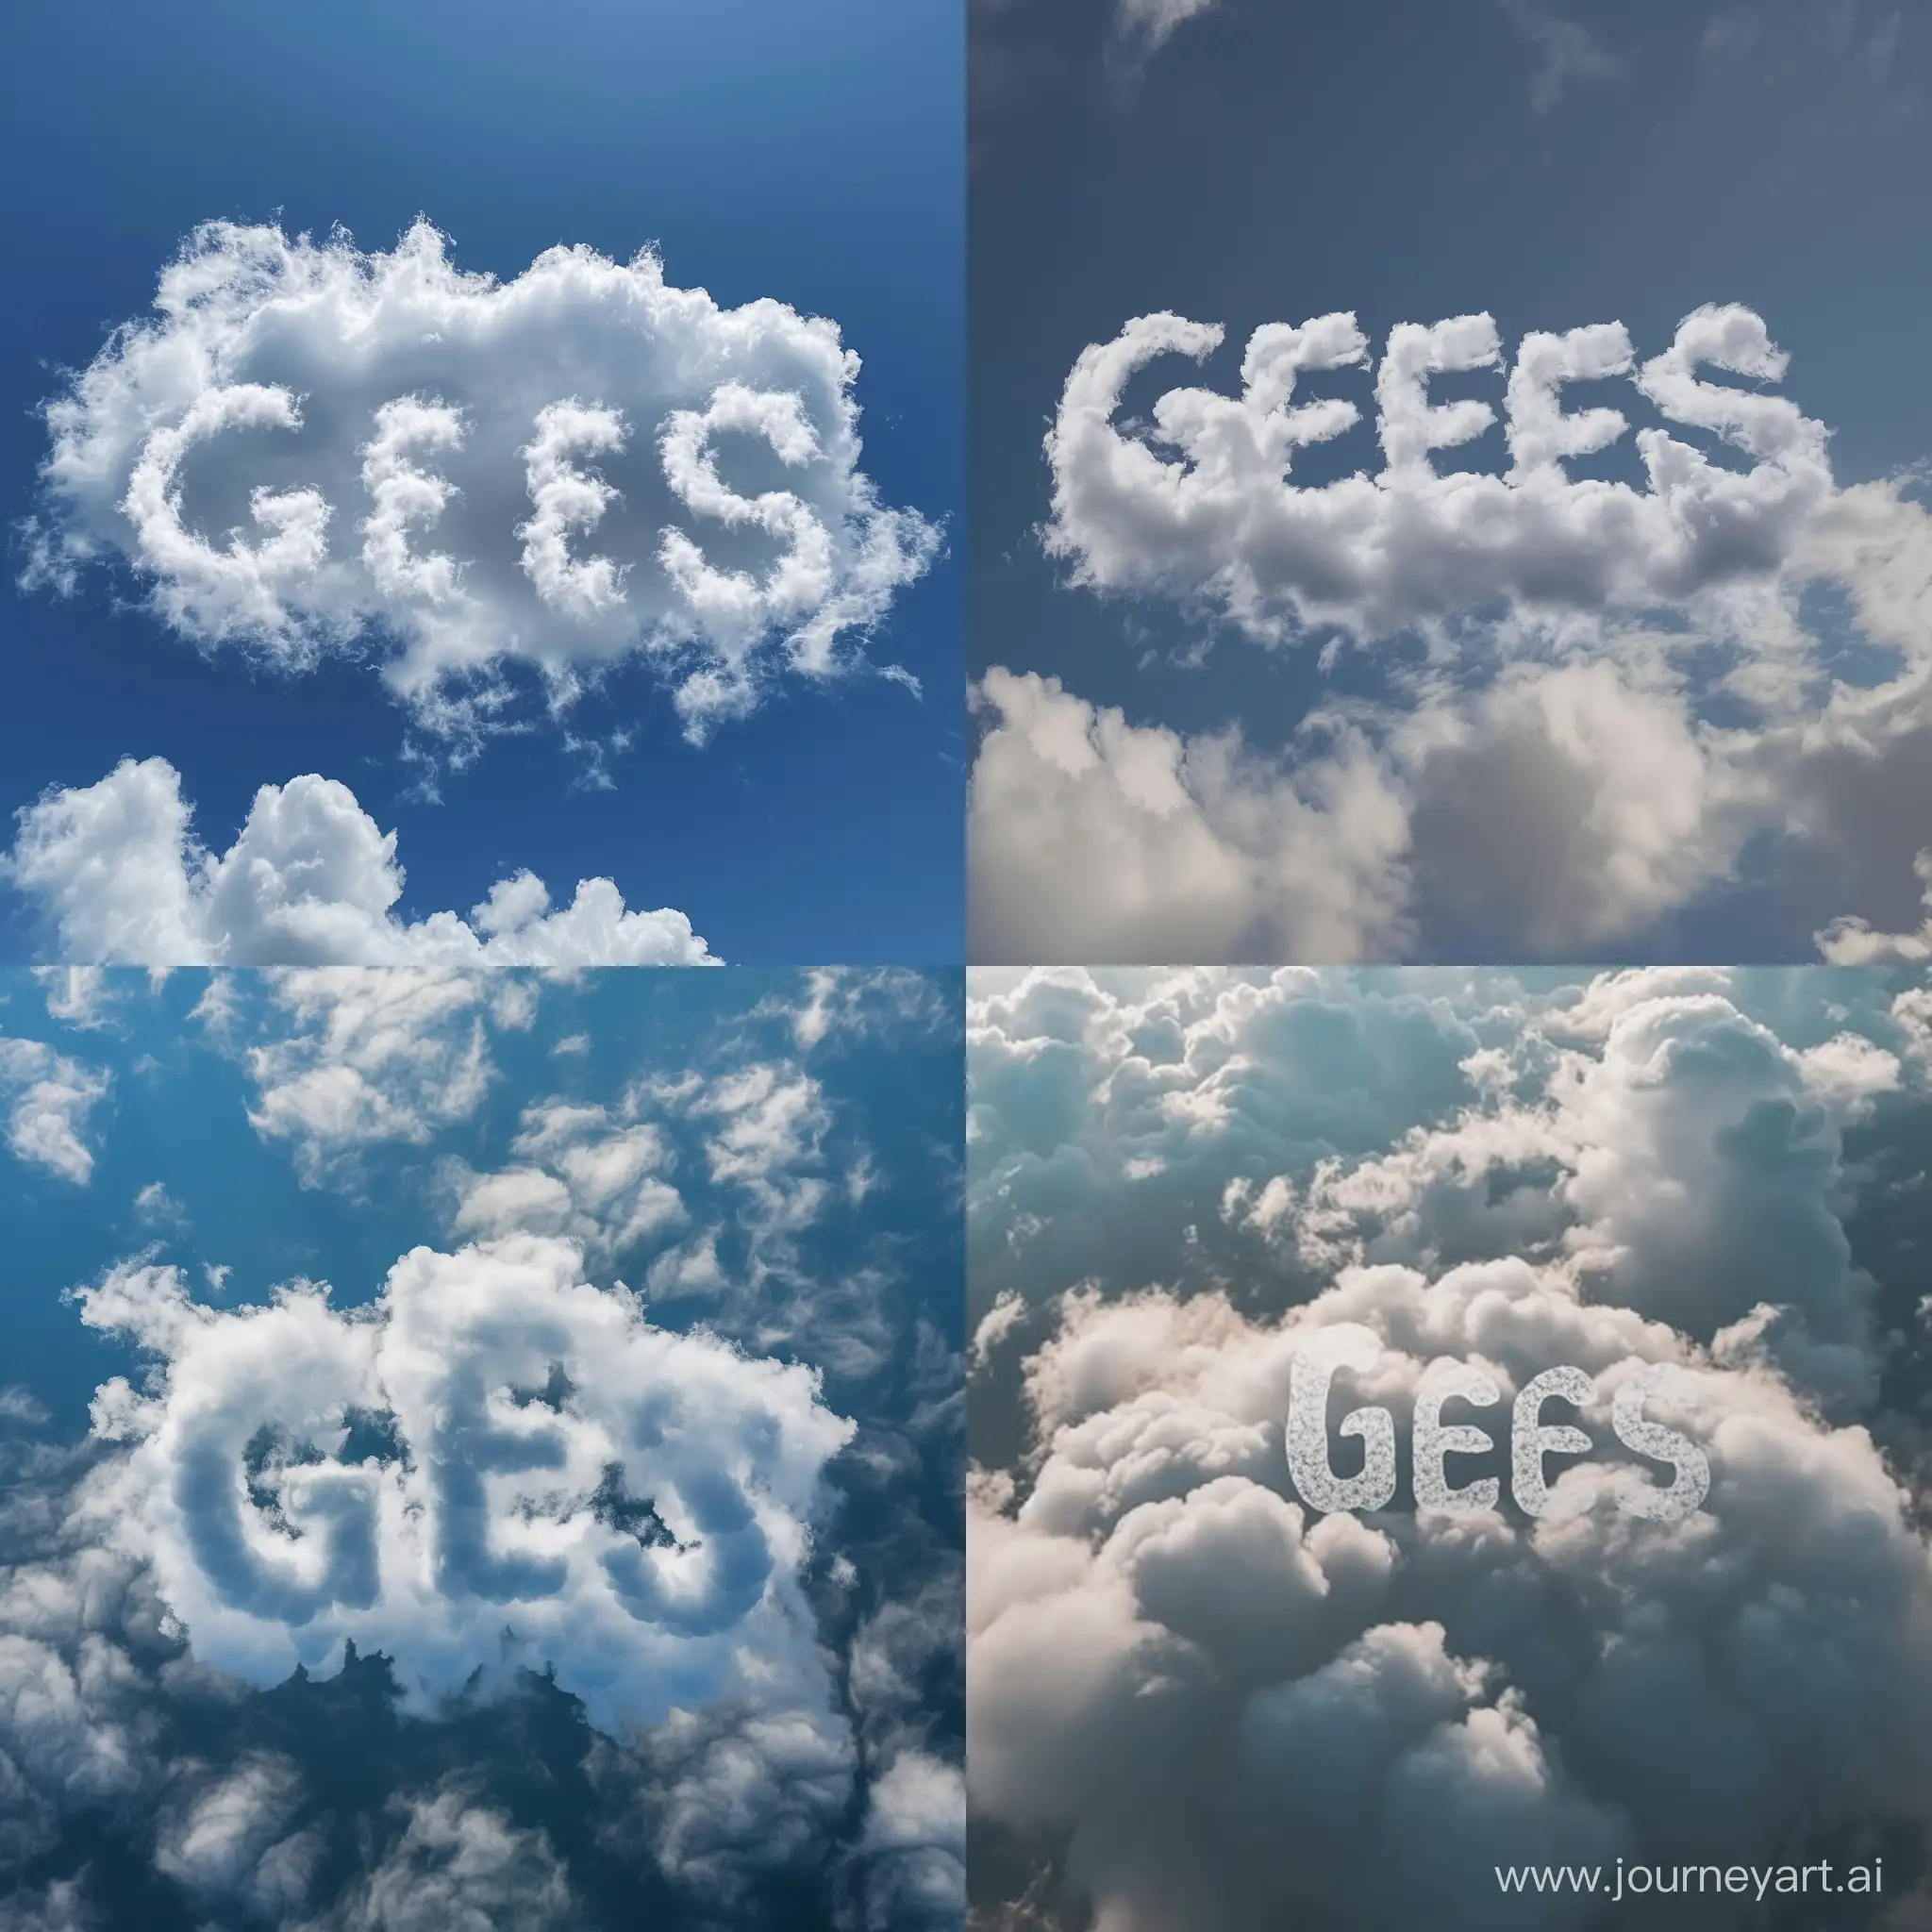 Put the words "Gees" in the clouds 
